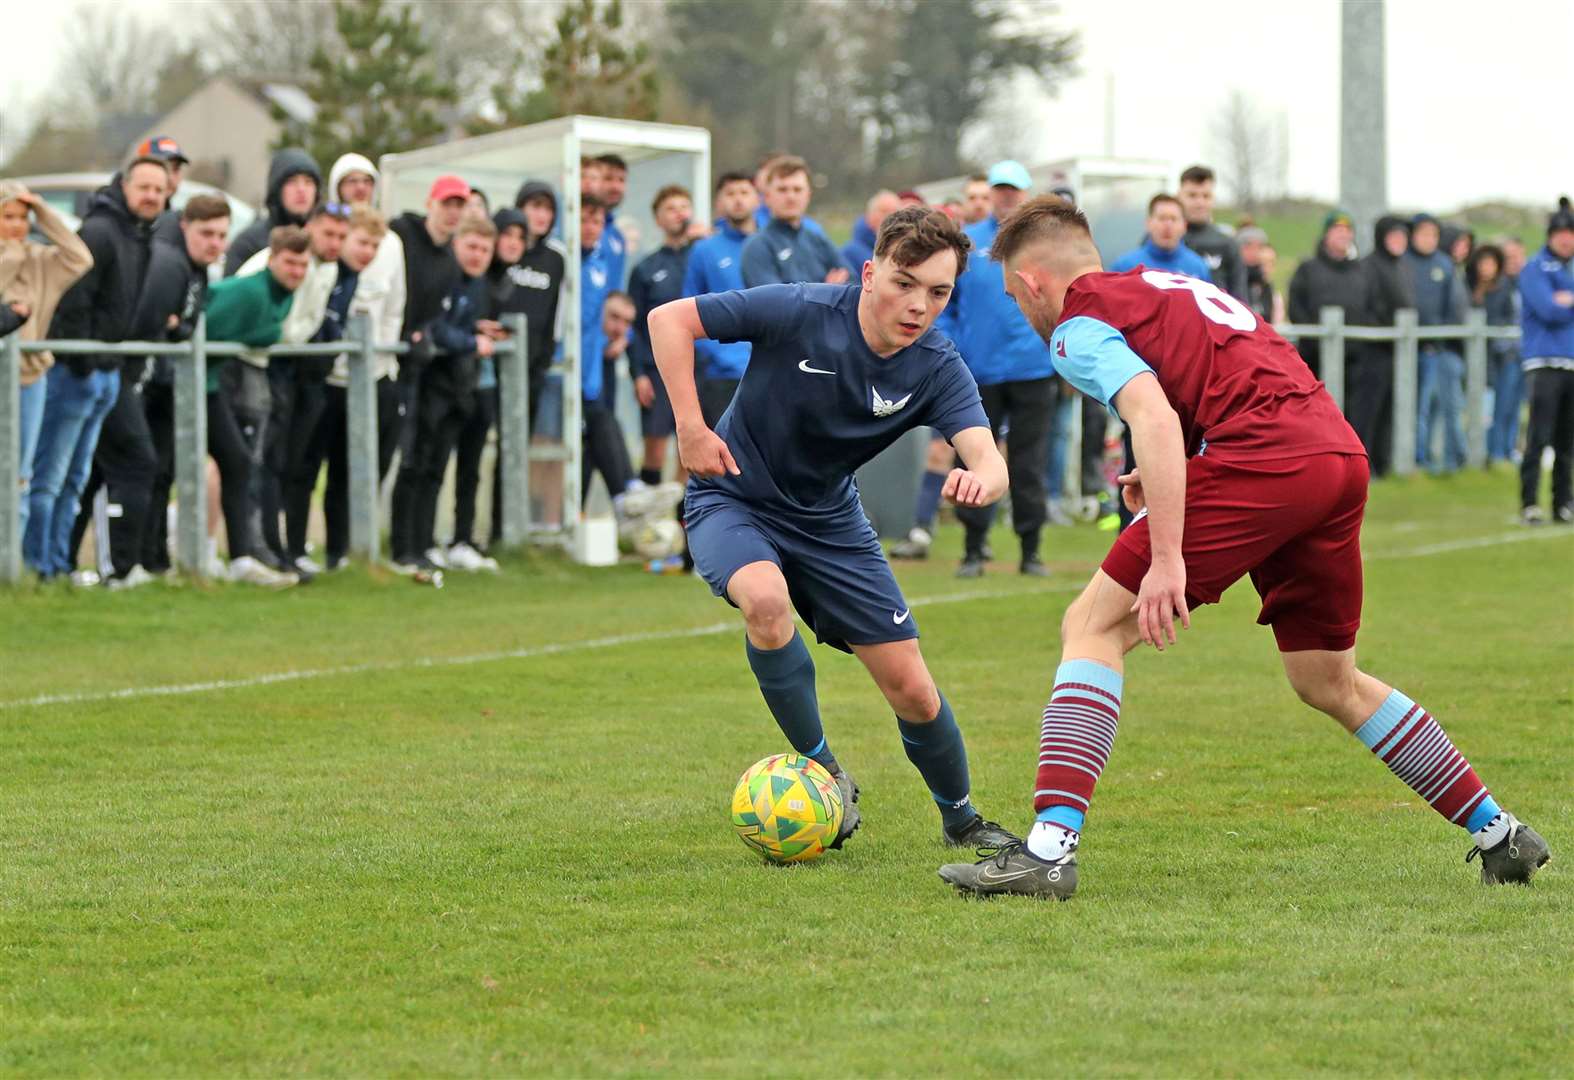 High Ormlie Hotspur ‘buzzing’ for cup clash as they look to move on from poor run